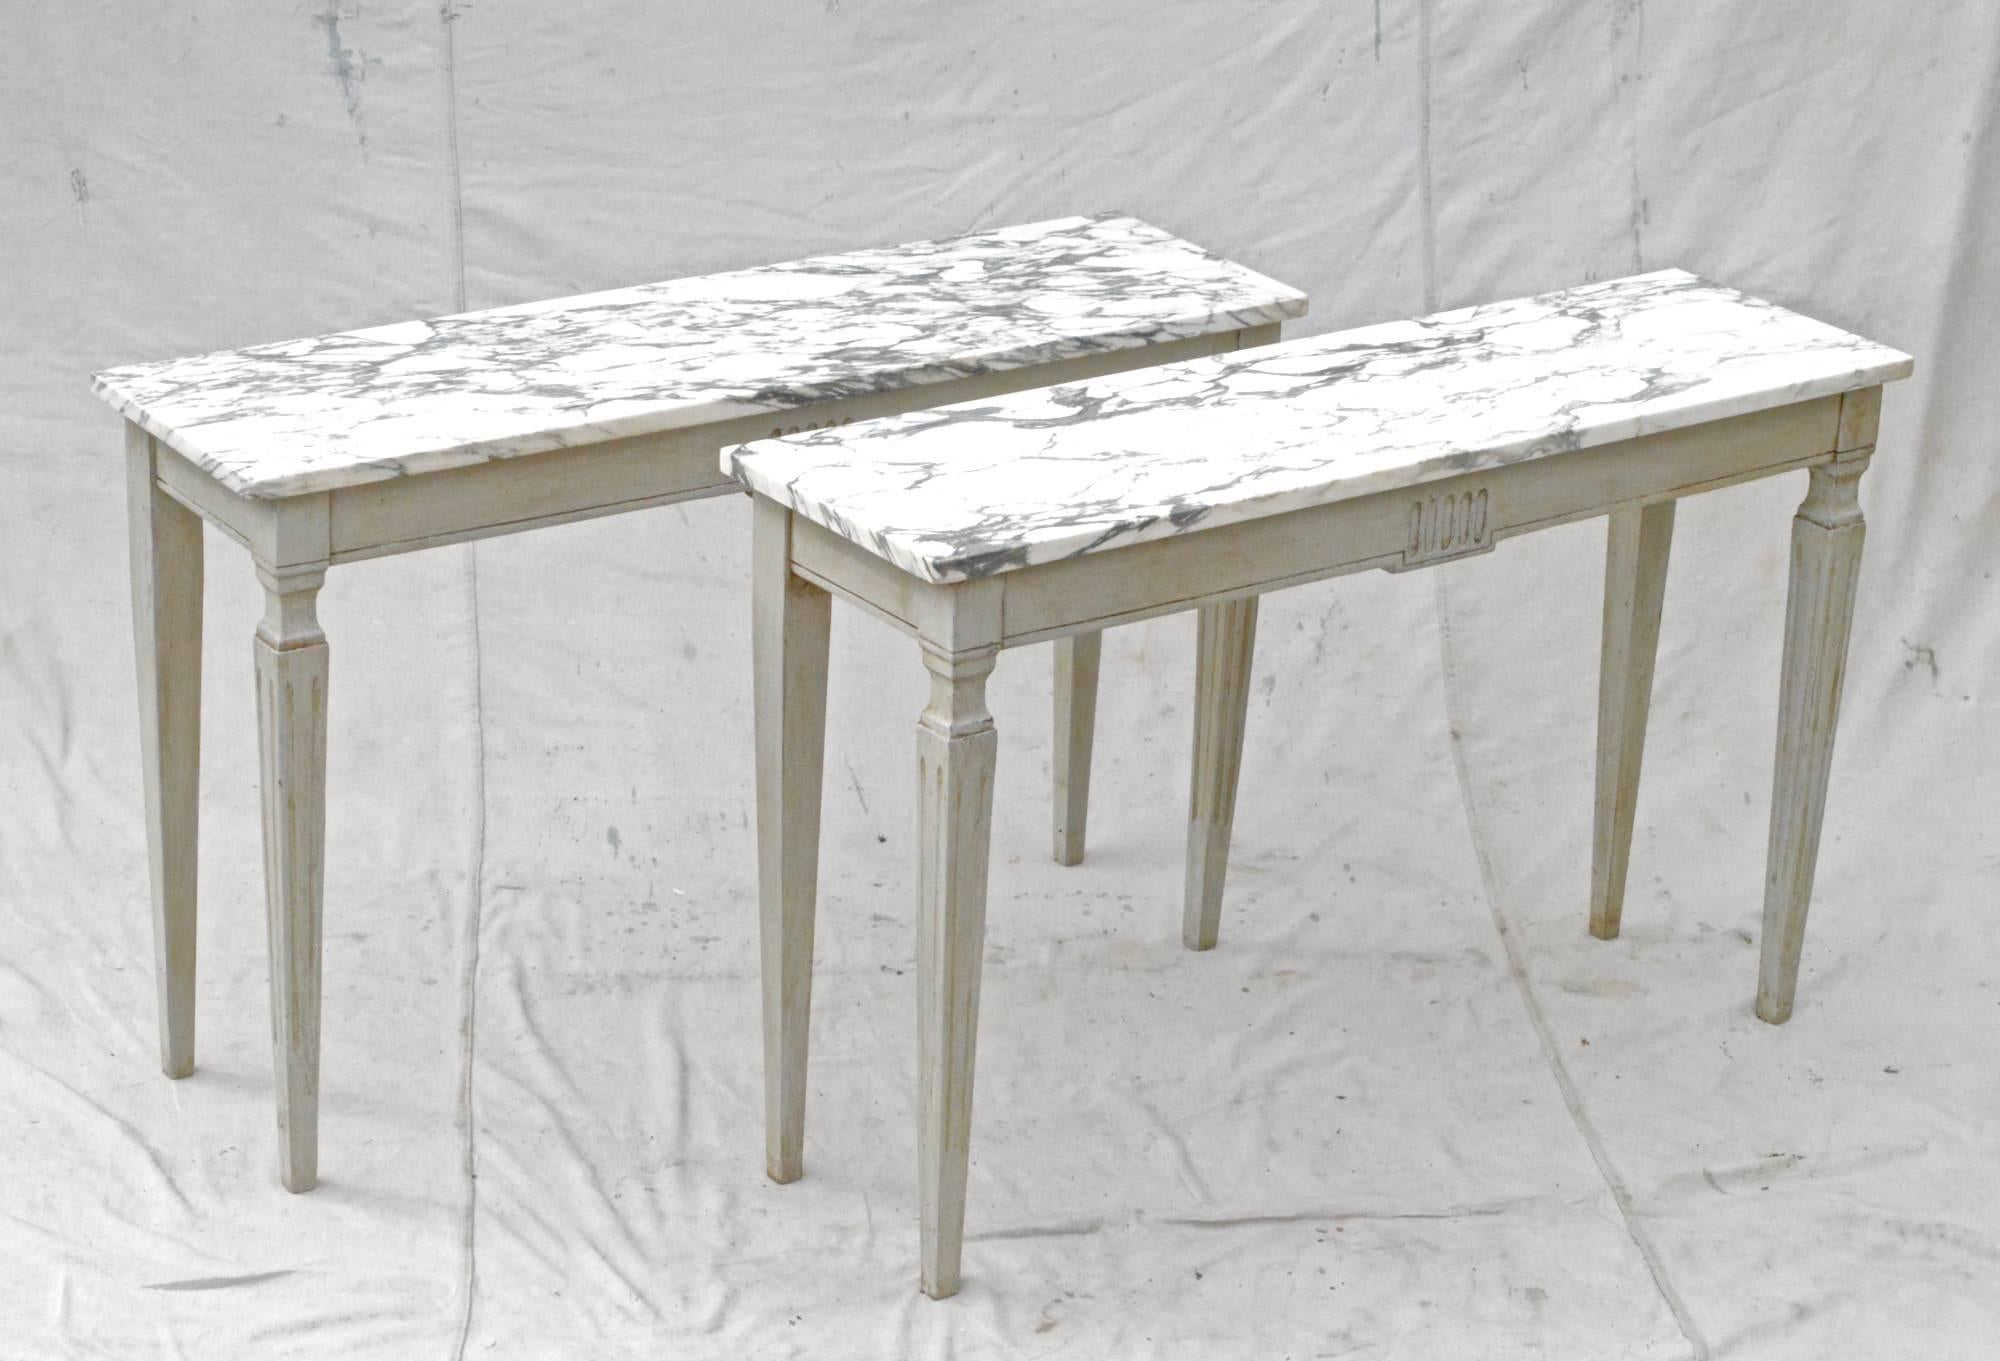 Pair of Louis XVI styled consoles having elegant marble tops and strong, simple lines throughout. On both tables, the paint has recently been updated.